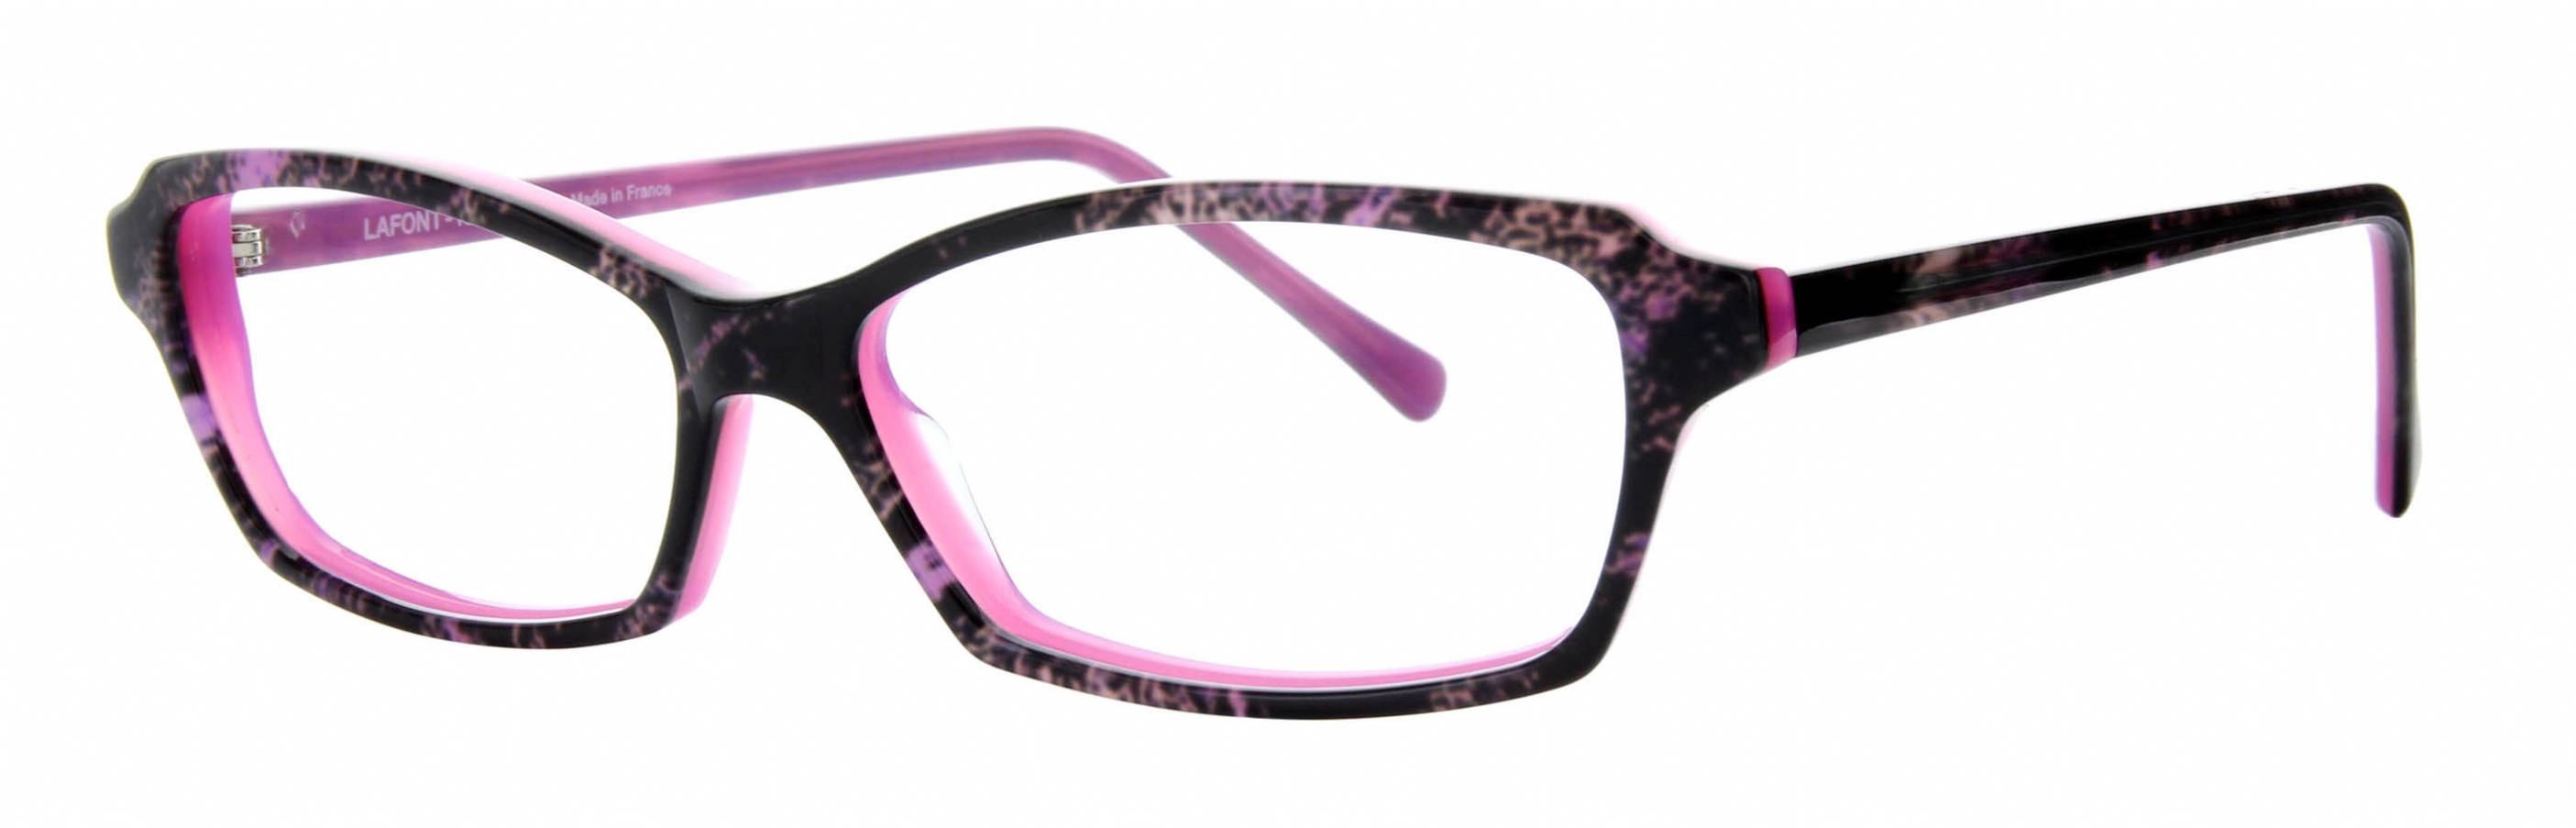 LAFONT NELLY 7010